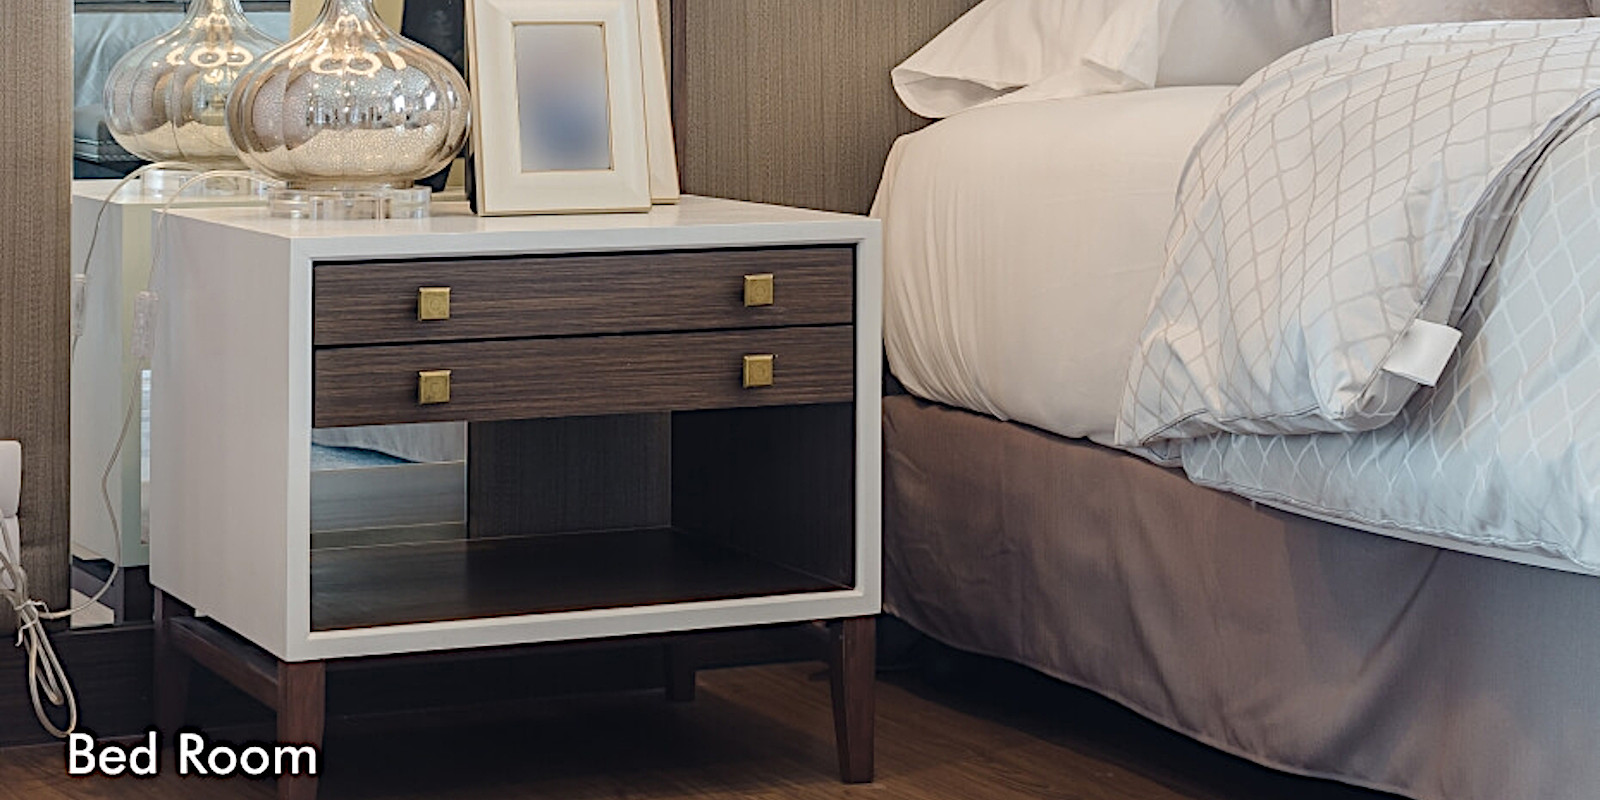 Bedroom furniture clearance price